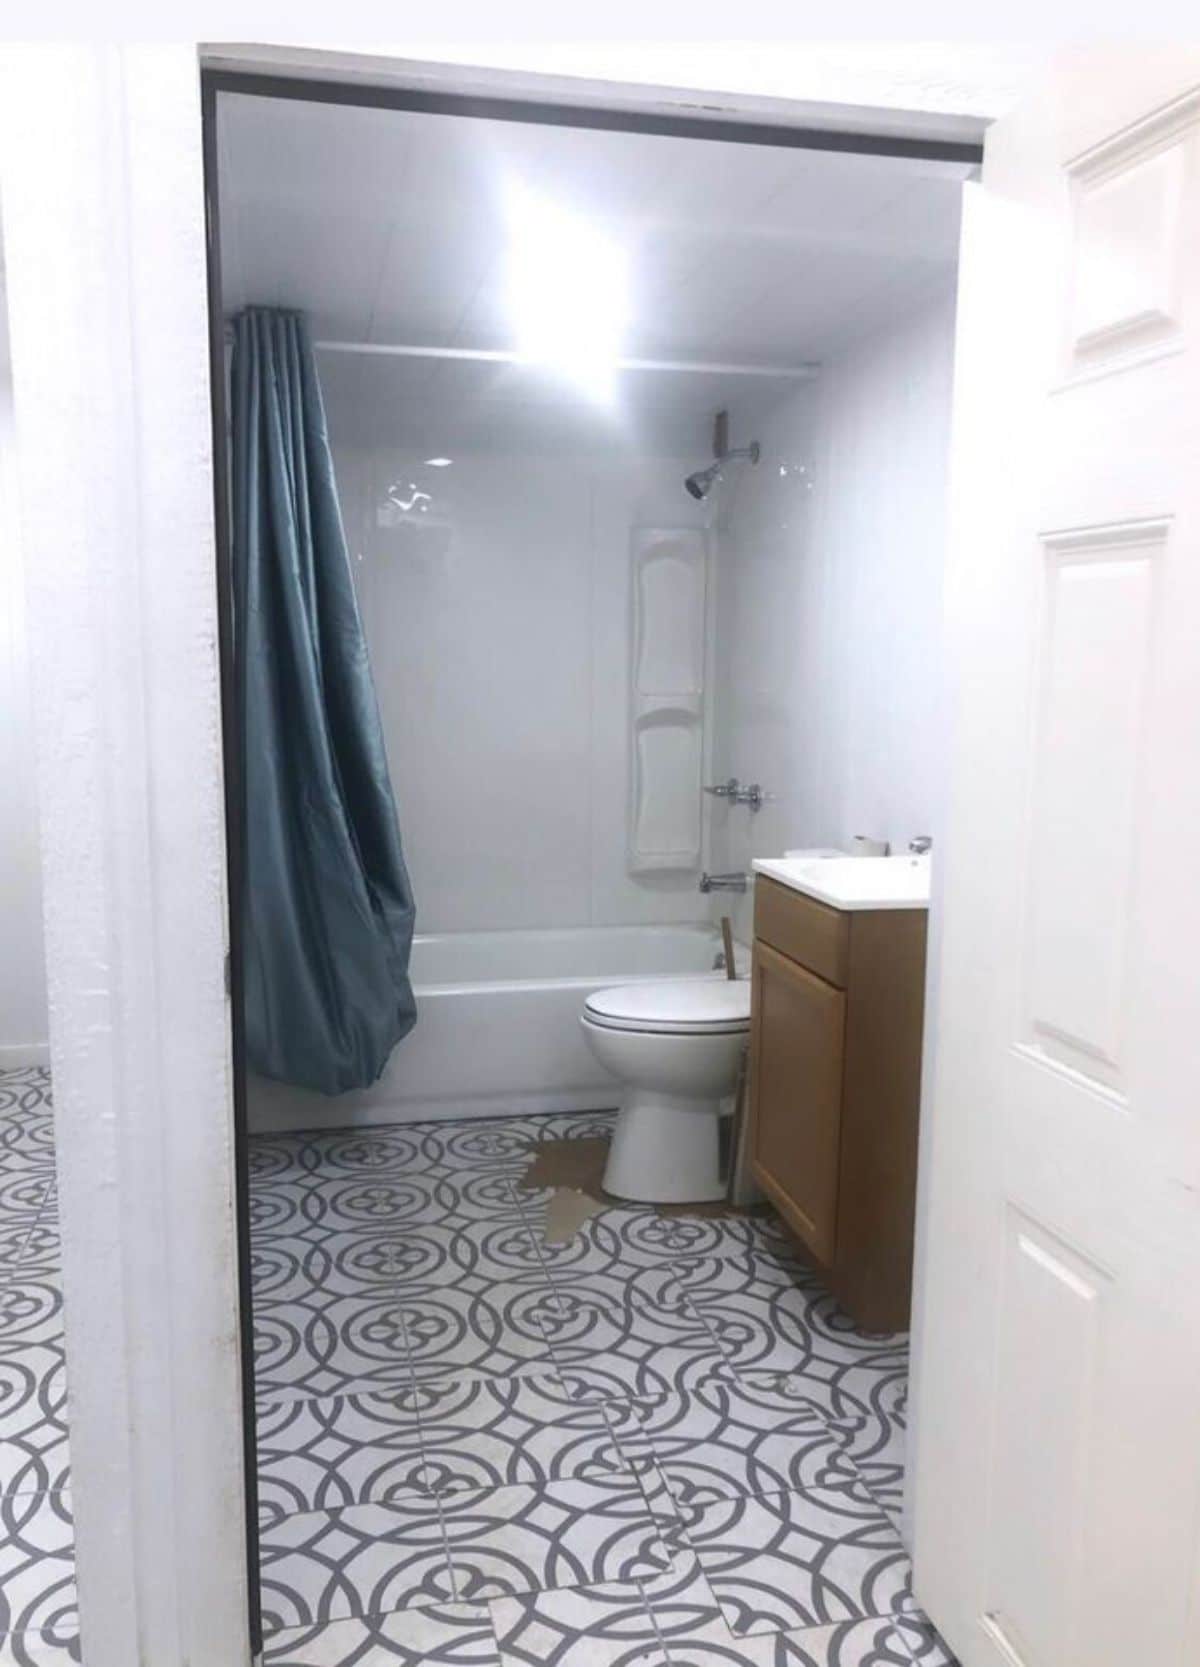 Bathroom of 24’ Tiny Cottage With Two Lofts has a small bath tub, toilet and sink